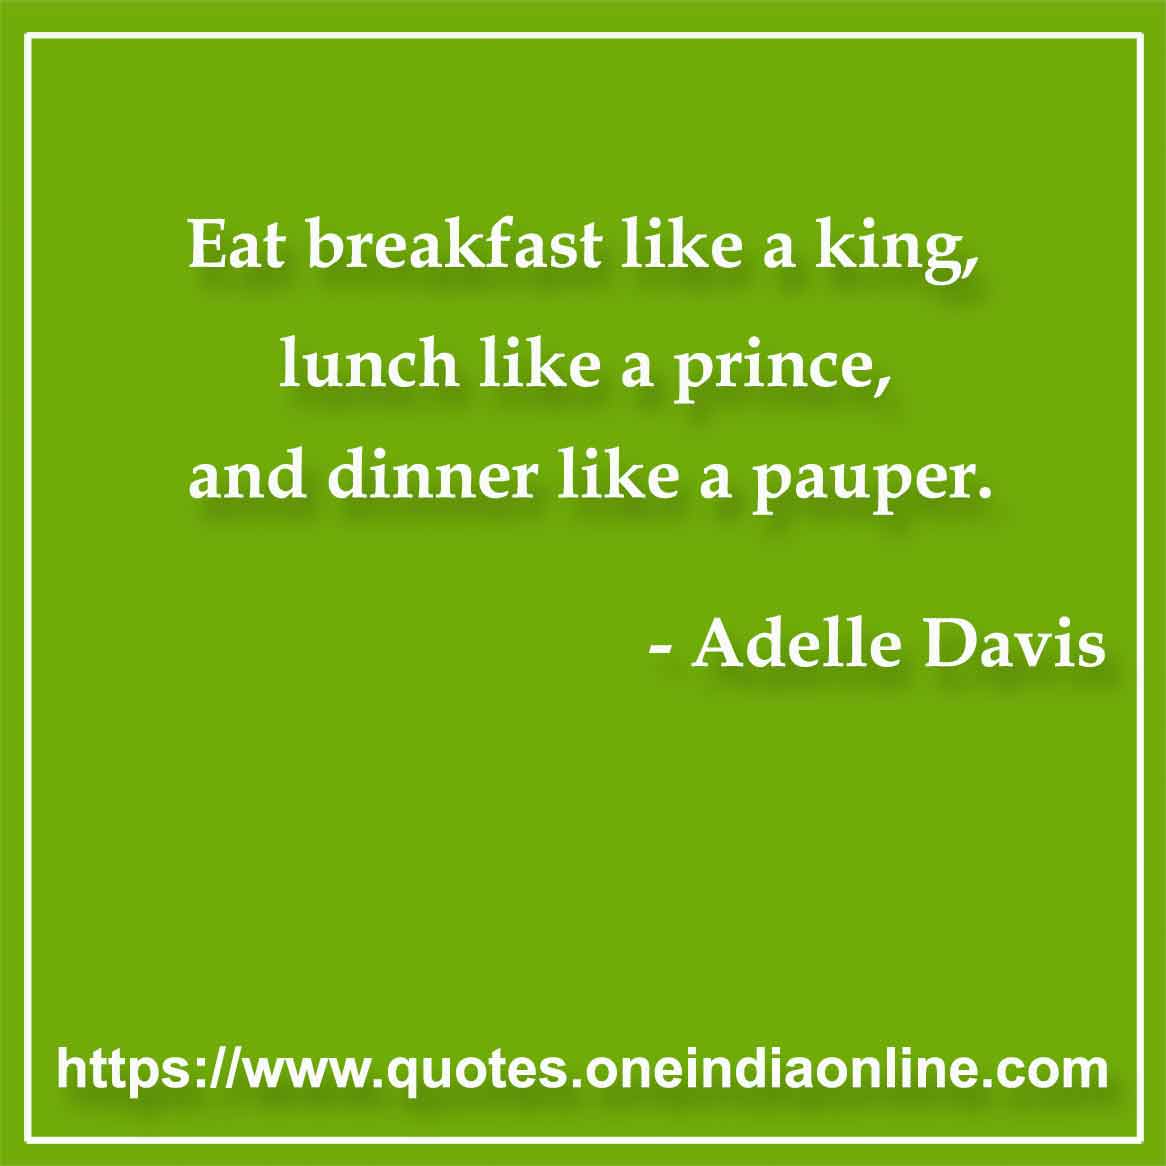 Eat breakfast like a king, lunch like a prince, and dinner like a pauper.

- Food Quotes by Adelle Davis